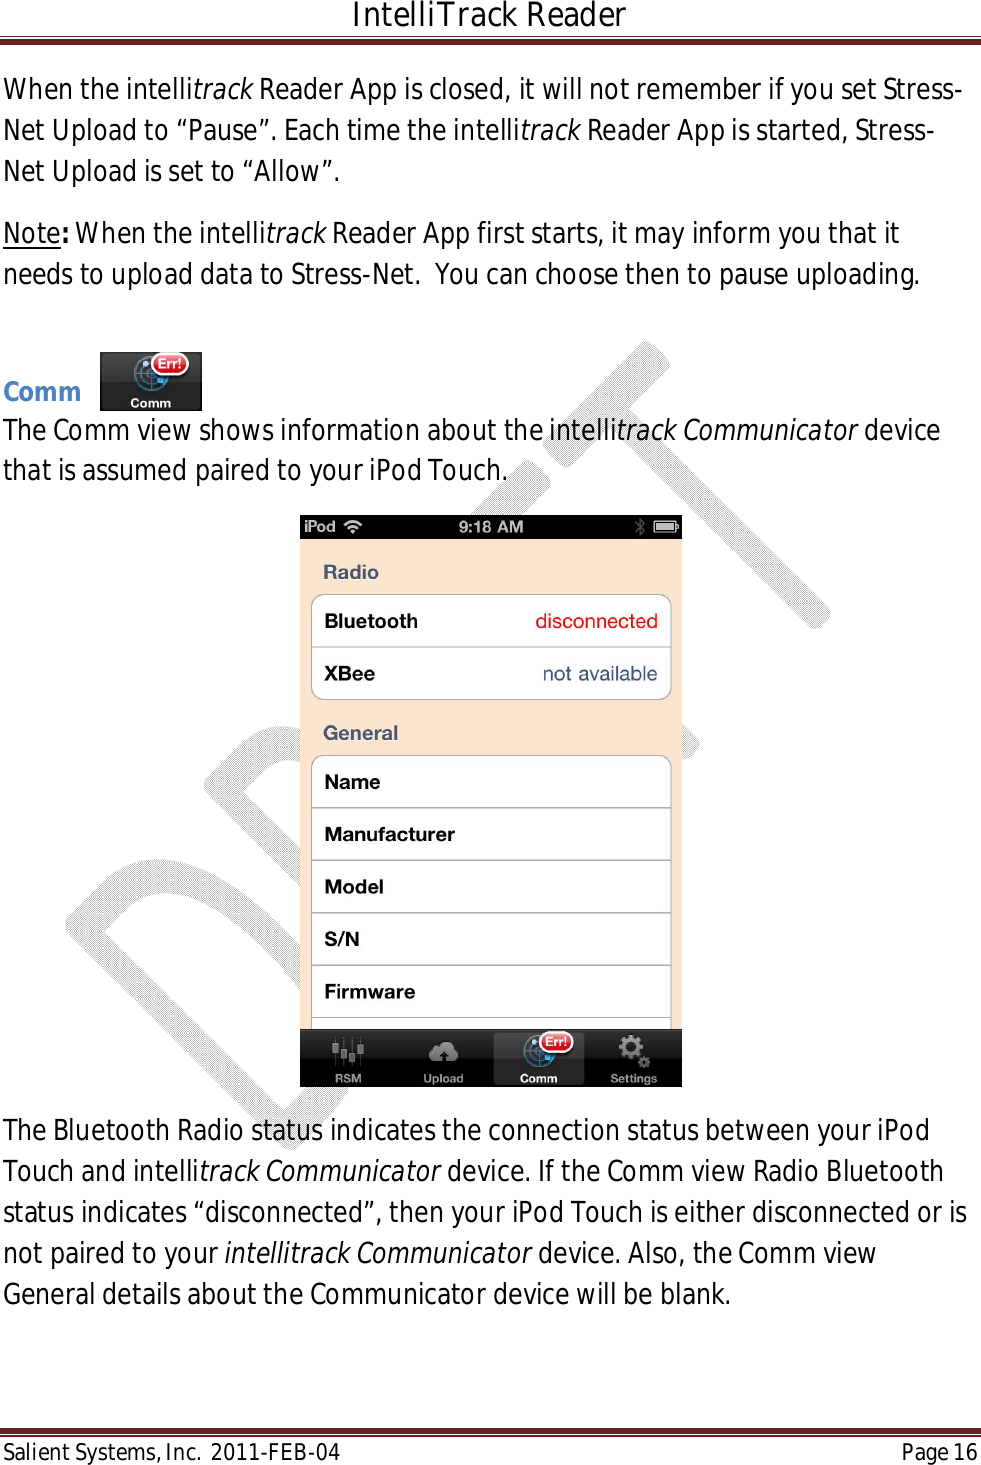 IntelliTrack Reader  Salient Systems, Inc.  2011-FEB-04 Page 16  When the intellitrack Reader App is closed, it will not remember if you set Stress-Net Upload to “Pause”. Each time the intellitrack Reader App is started, Stress-Net Upload is set to “Allow”. Note: When the intellitrack Reader App first starts, it may inform you that it needs to upload data to Stress-Net.  You can choose then to pause uploading.  Comm The Comm view shows information about the intellitrack Communicator device that is assumed paired to your iPod Touch.    The Bluetooth Radio status indicates the connection status between your iPod Touch and intellitrack Communicator device. If the Comm view Radio Bluetooth status indicates “disconnected”, then your iPod Touch is either disconnected or is not paired to your intellitrack Communicator device. Also, the Comm view General details about the Communicator device will be blank. 